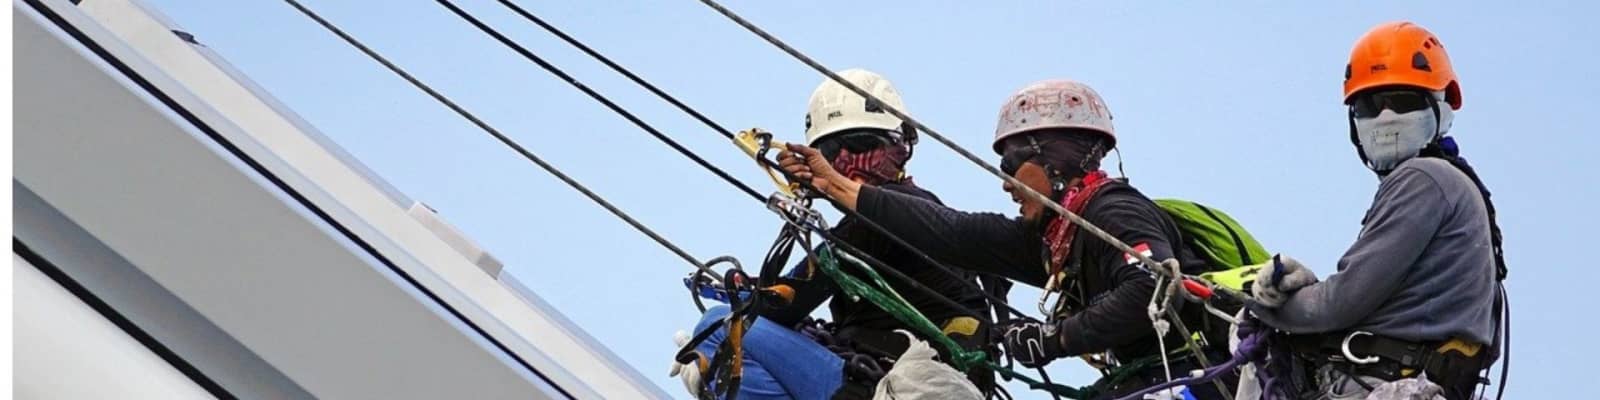 rope access pros in Johannesburg